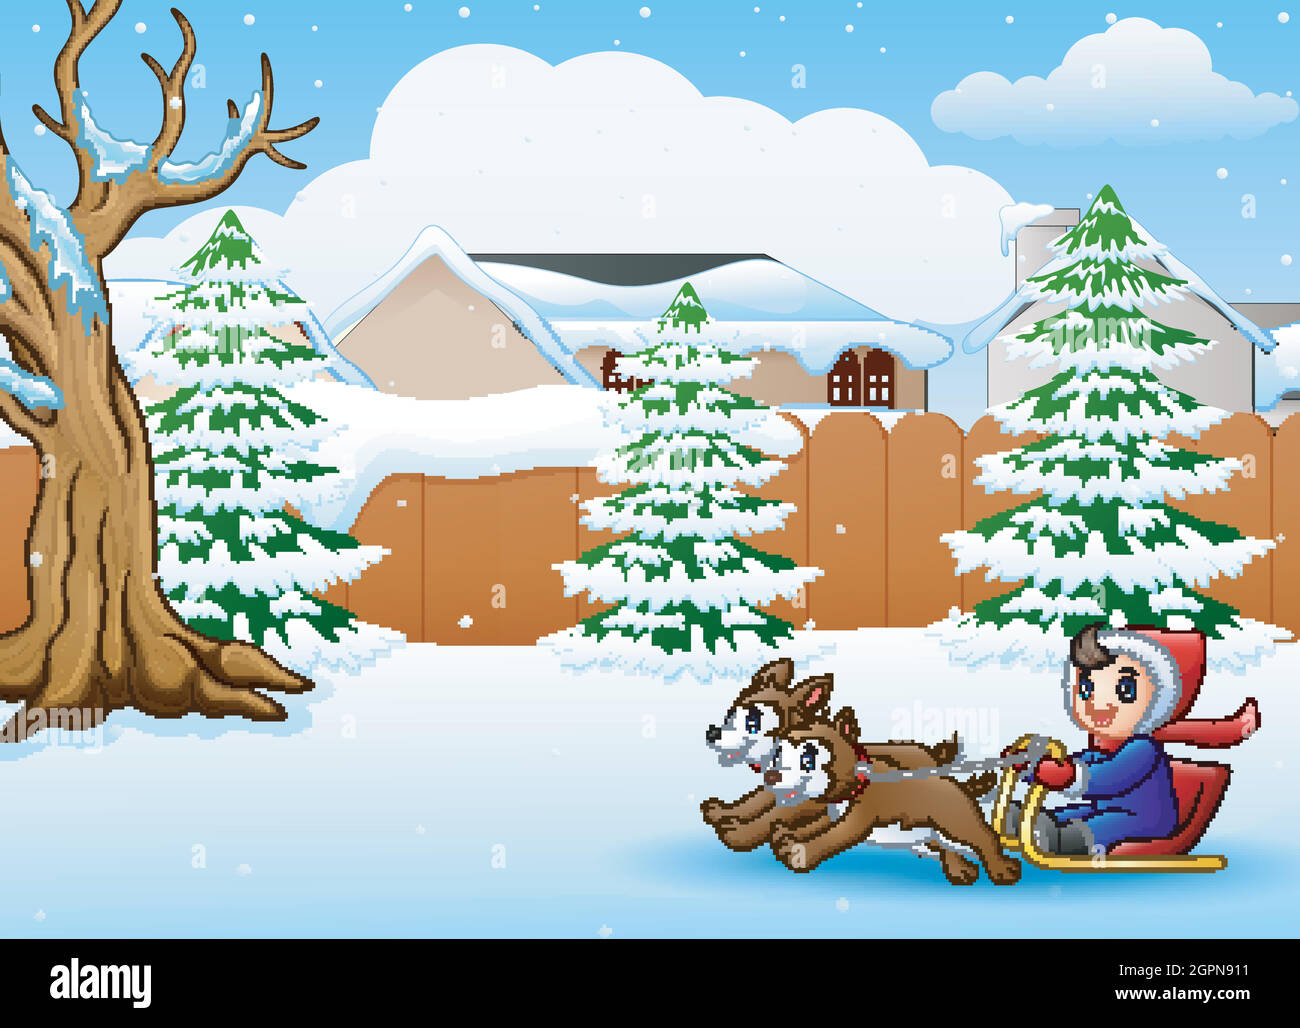 Cartoon boy riding sled on the snowing village pulled by two dogs Stock Vector